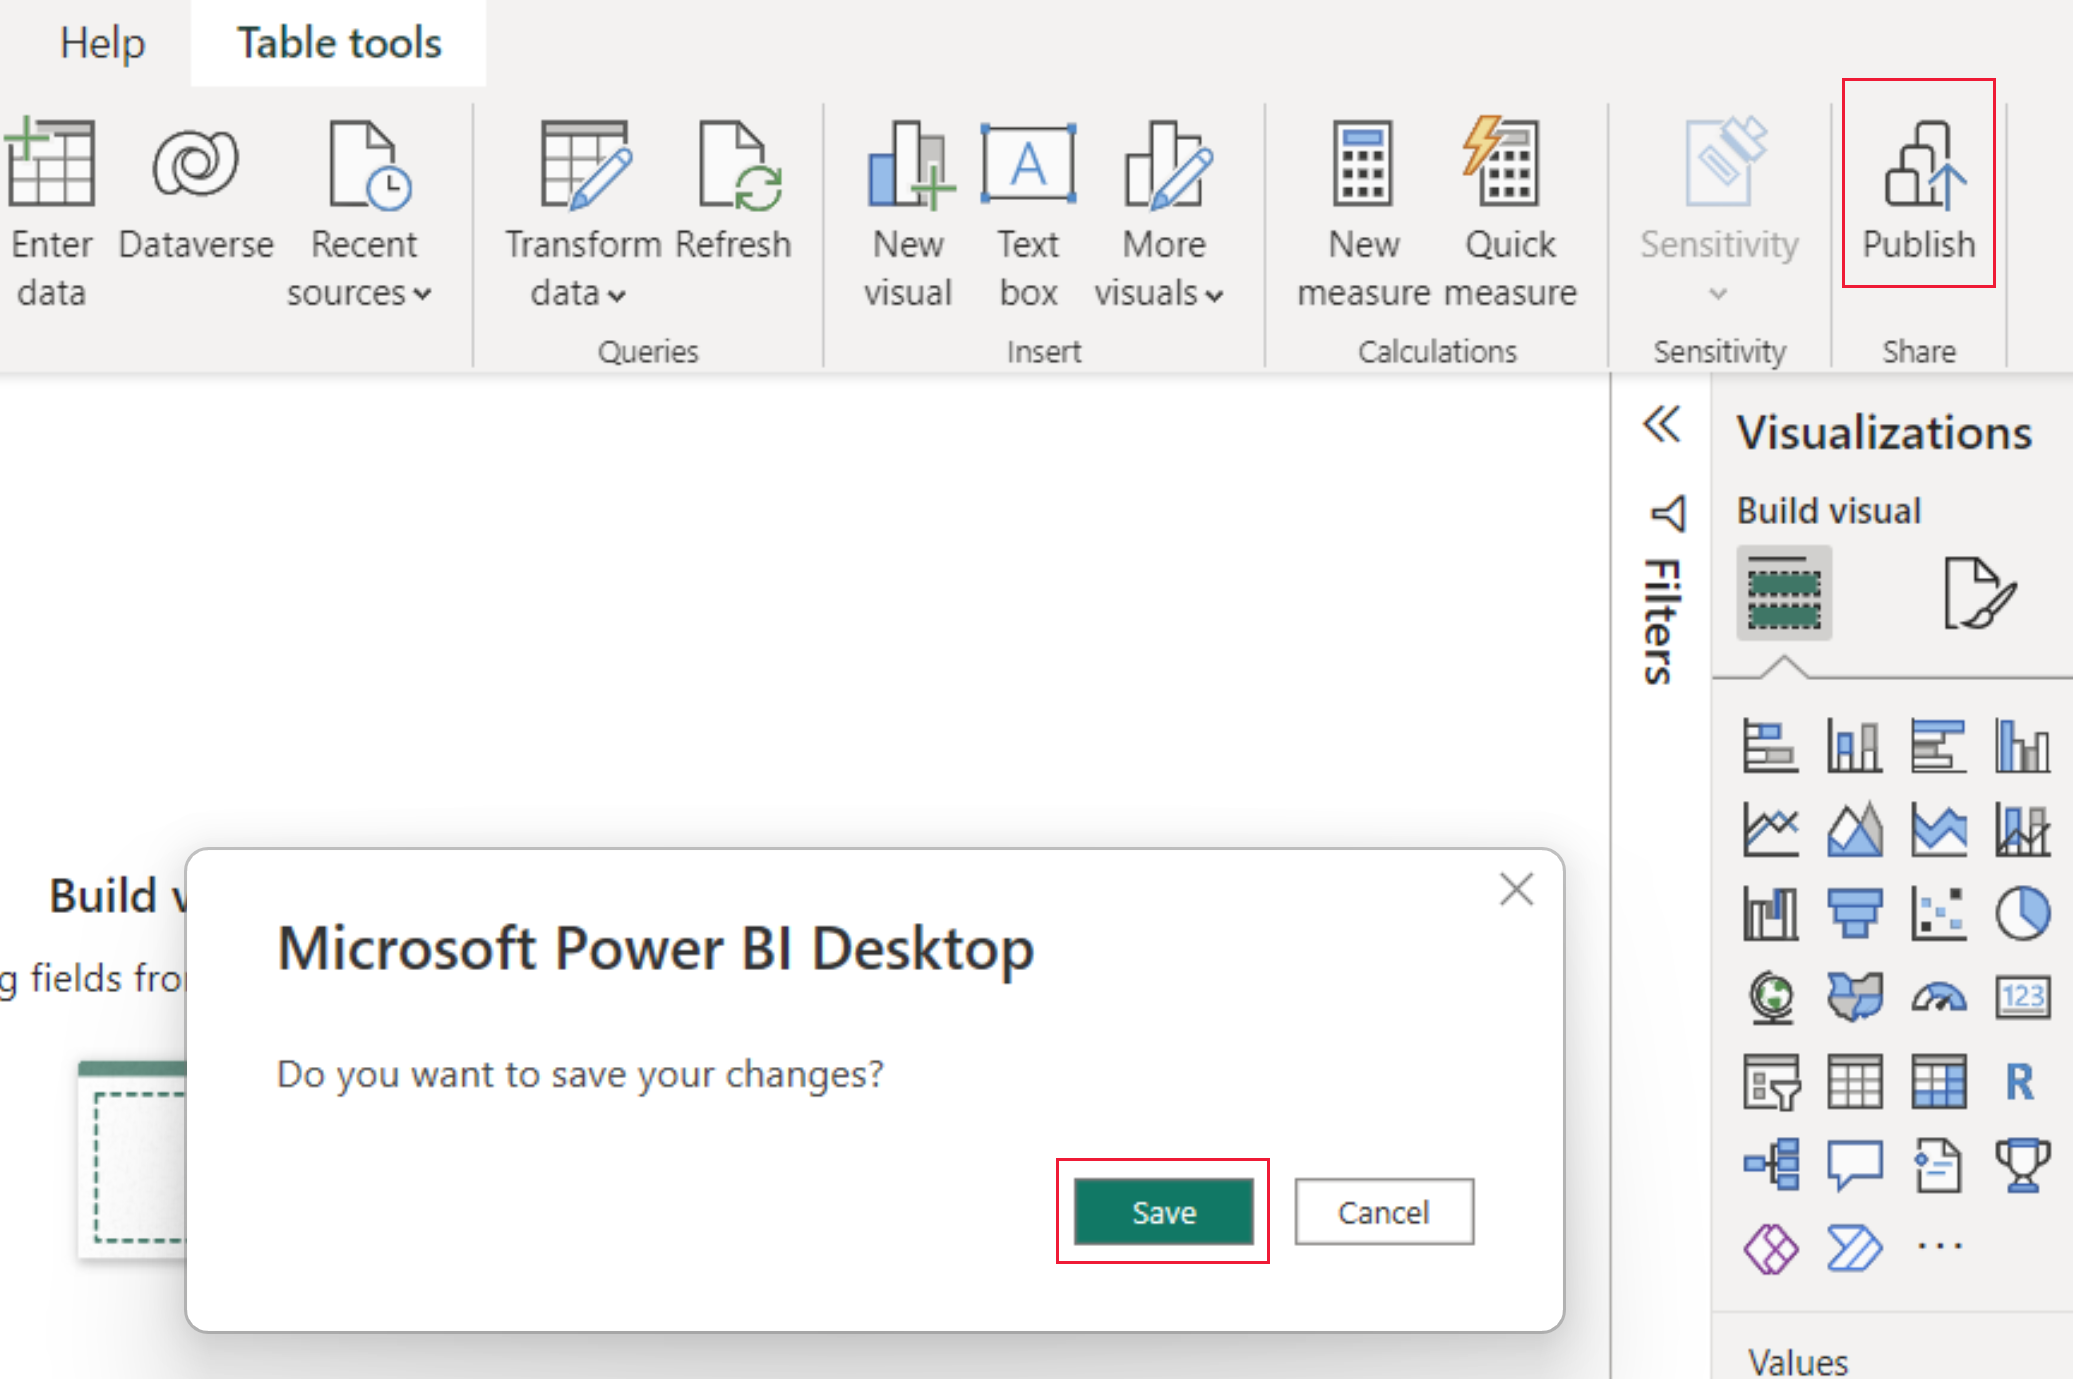 A screenshot showing the Microsoft Power B I Desktop pop up window after the publish button is selected. The publish and save buttons are highlighted.